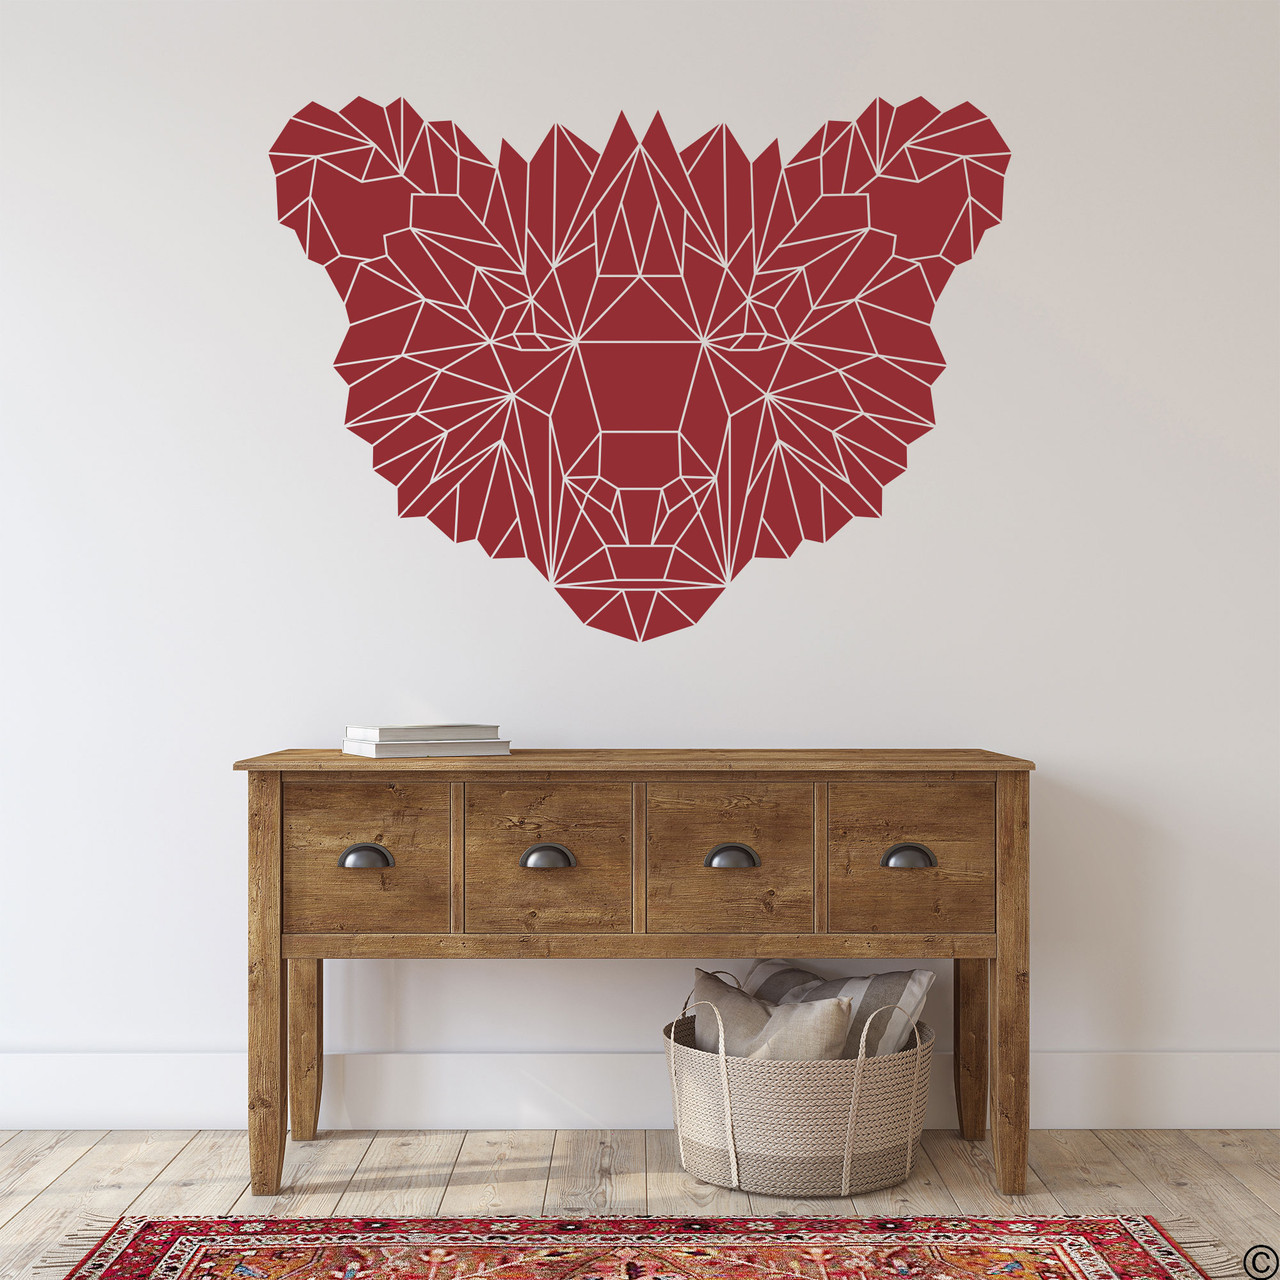 The Geometric Bear Face wall decal shown here in dark red vinyl color.